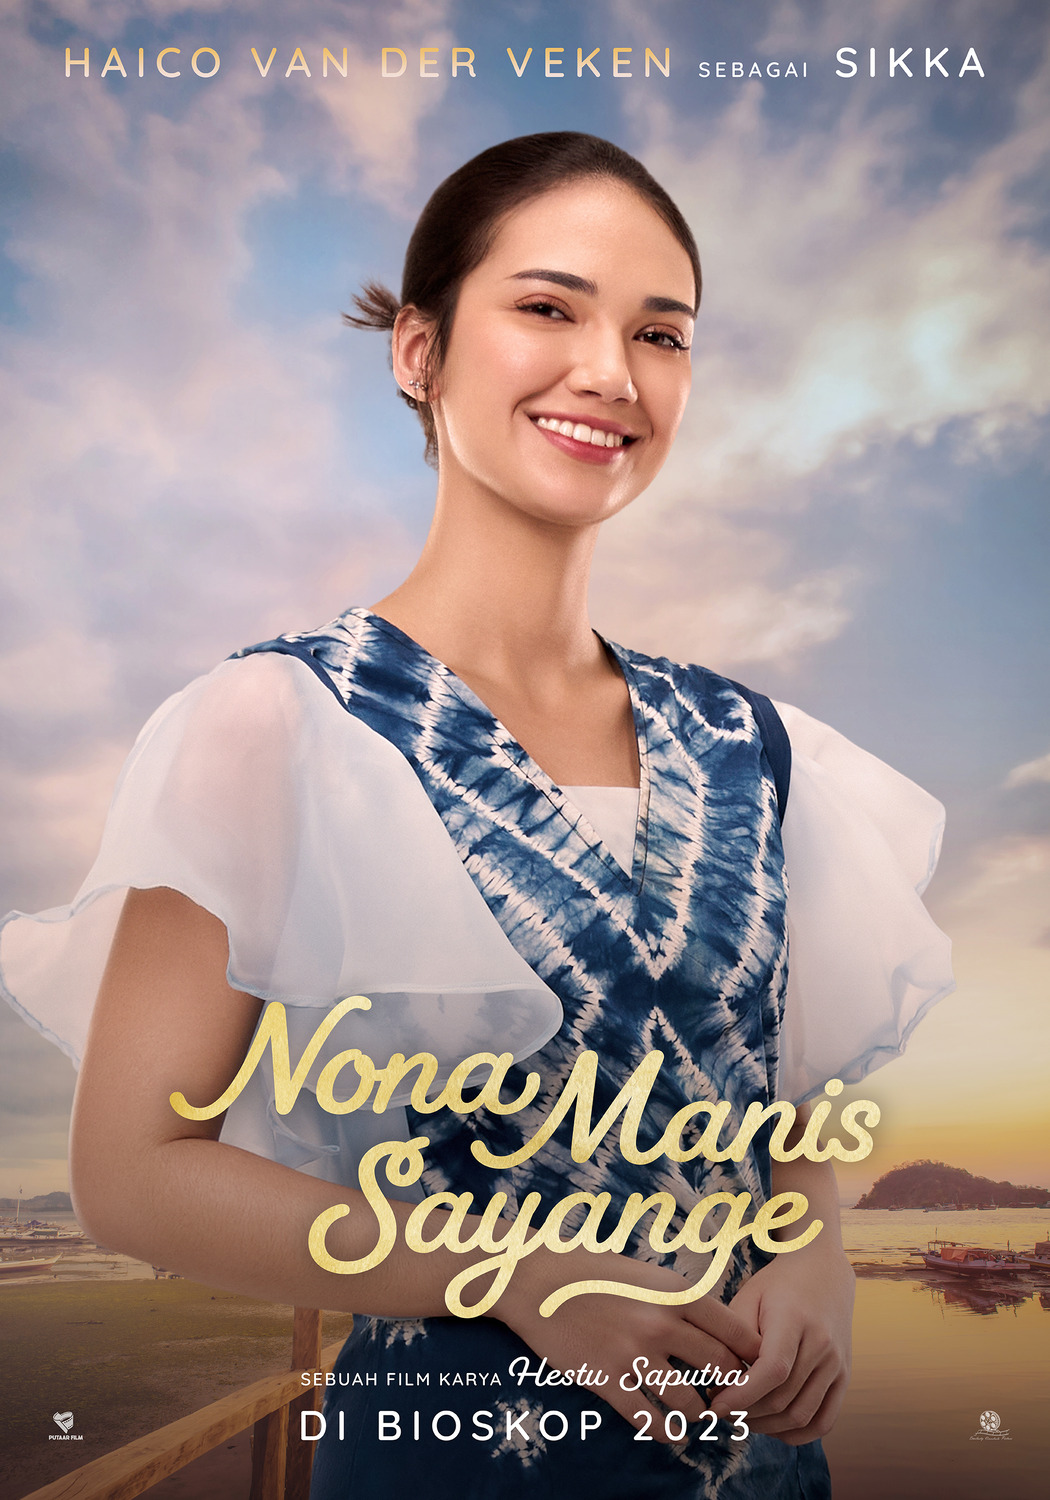 Extra Large Movie Poster Image for Nona Manis Sayange (#4 of 6)